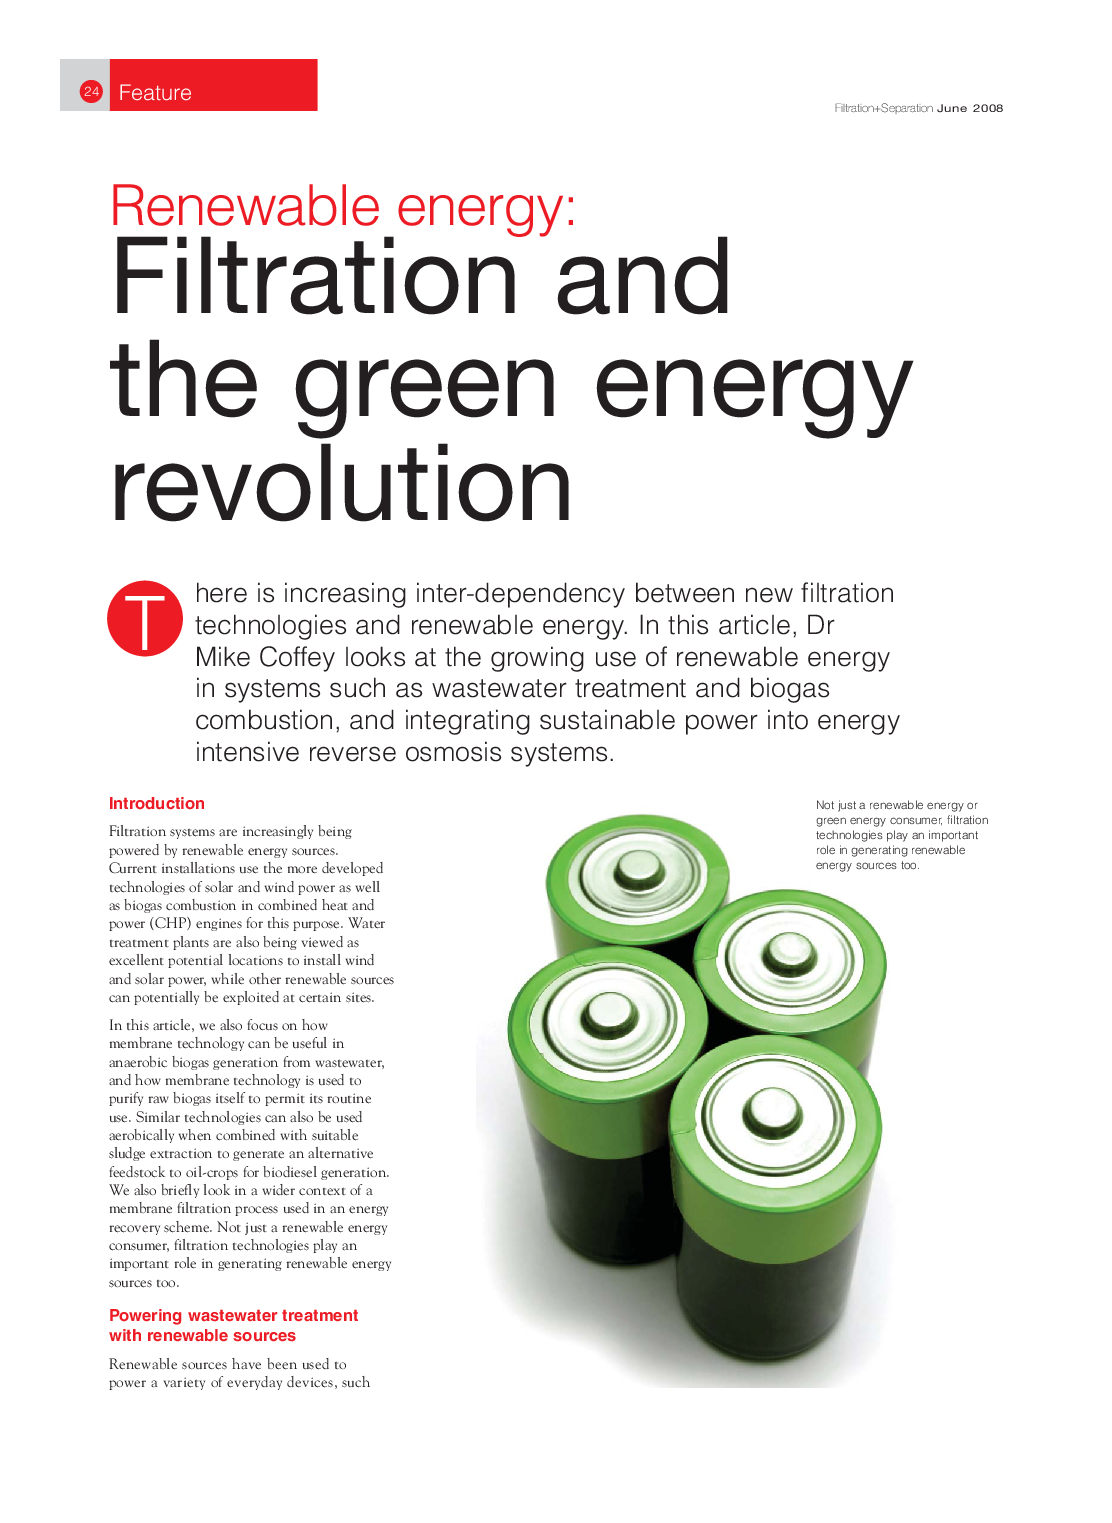 Renewable energy: Filtration and the green energy revolution